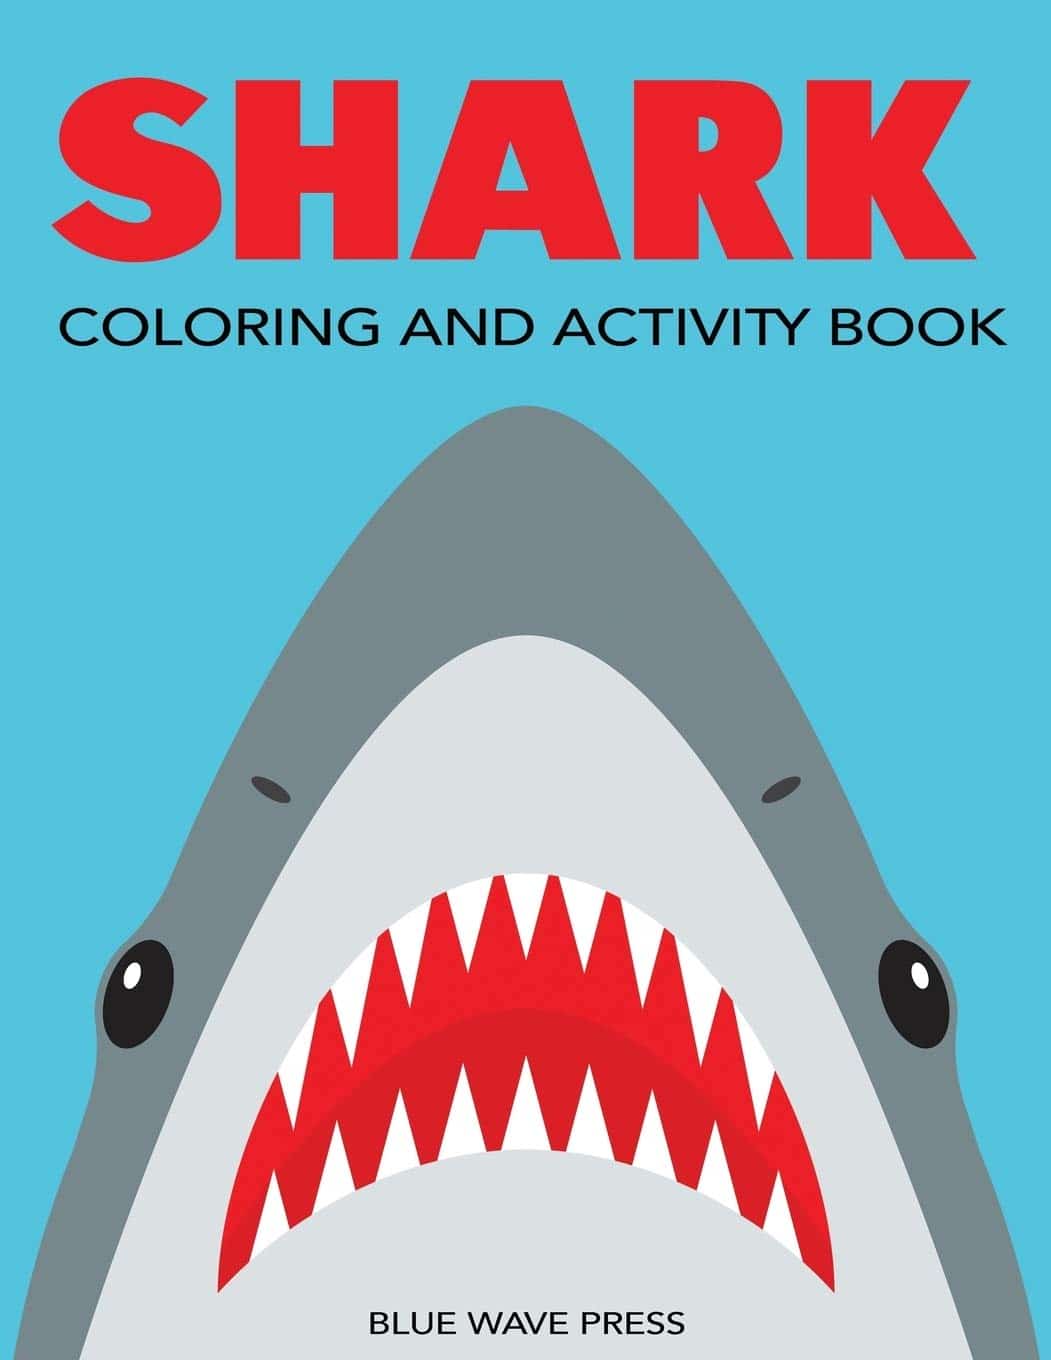 Fun-Packed Shark Coloring and Activity Book